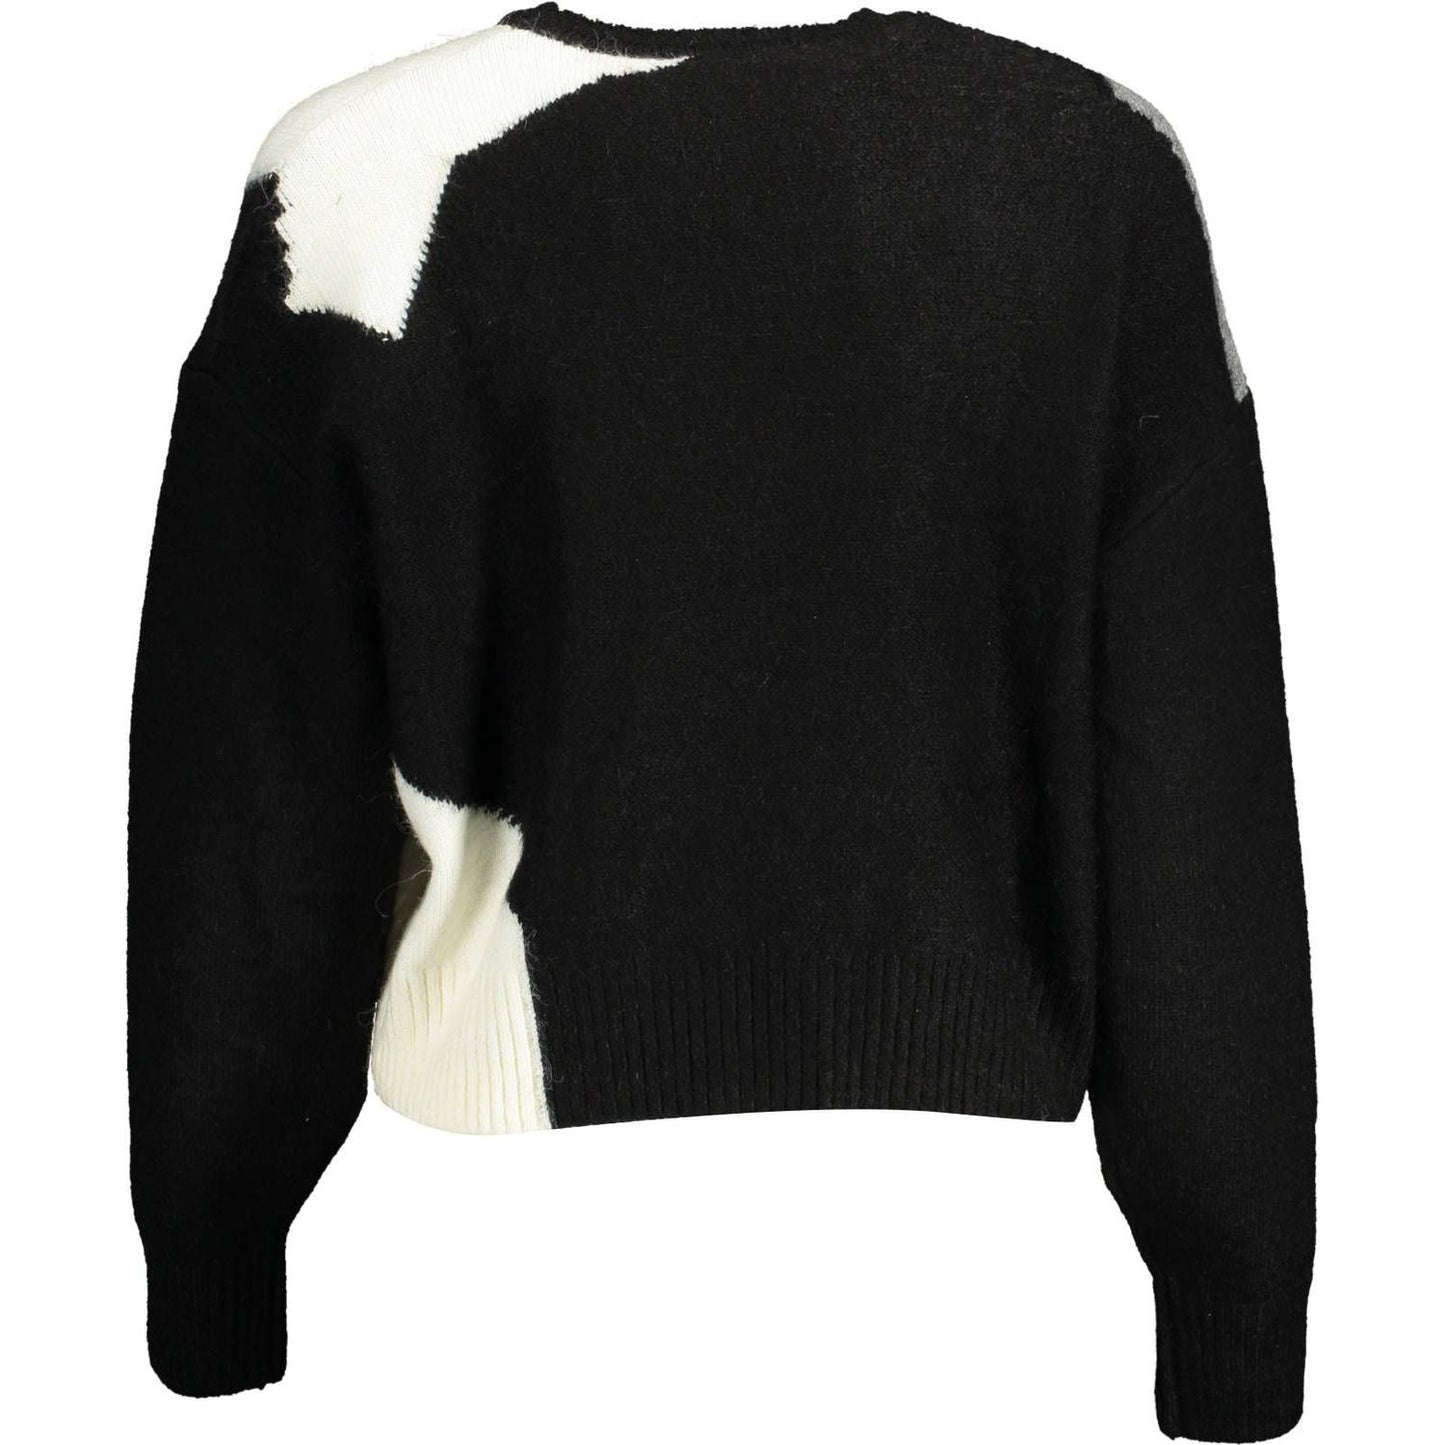 Desigual Chic Contrasting Long Sleeve Sweater chic-contrasting-long-sleeve-sweater